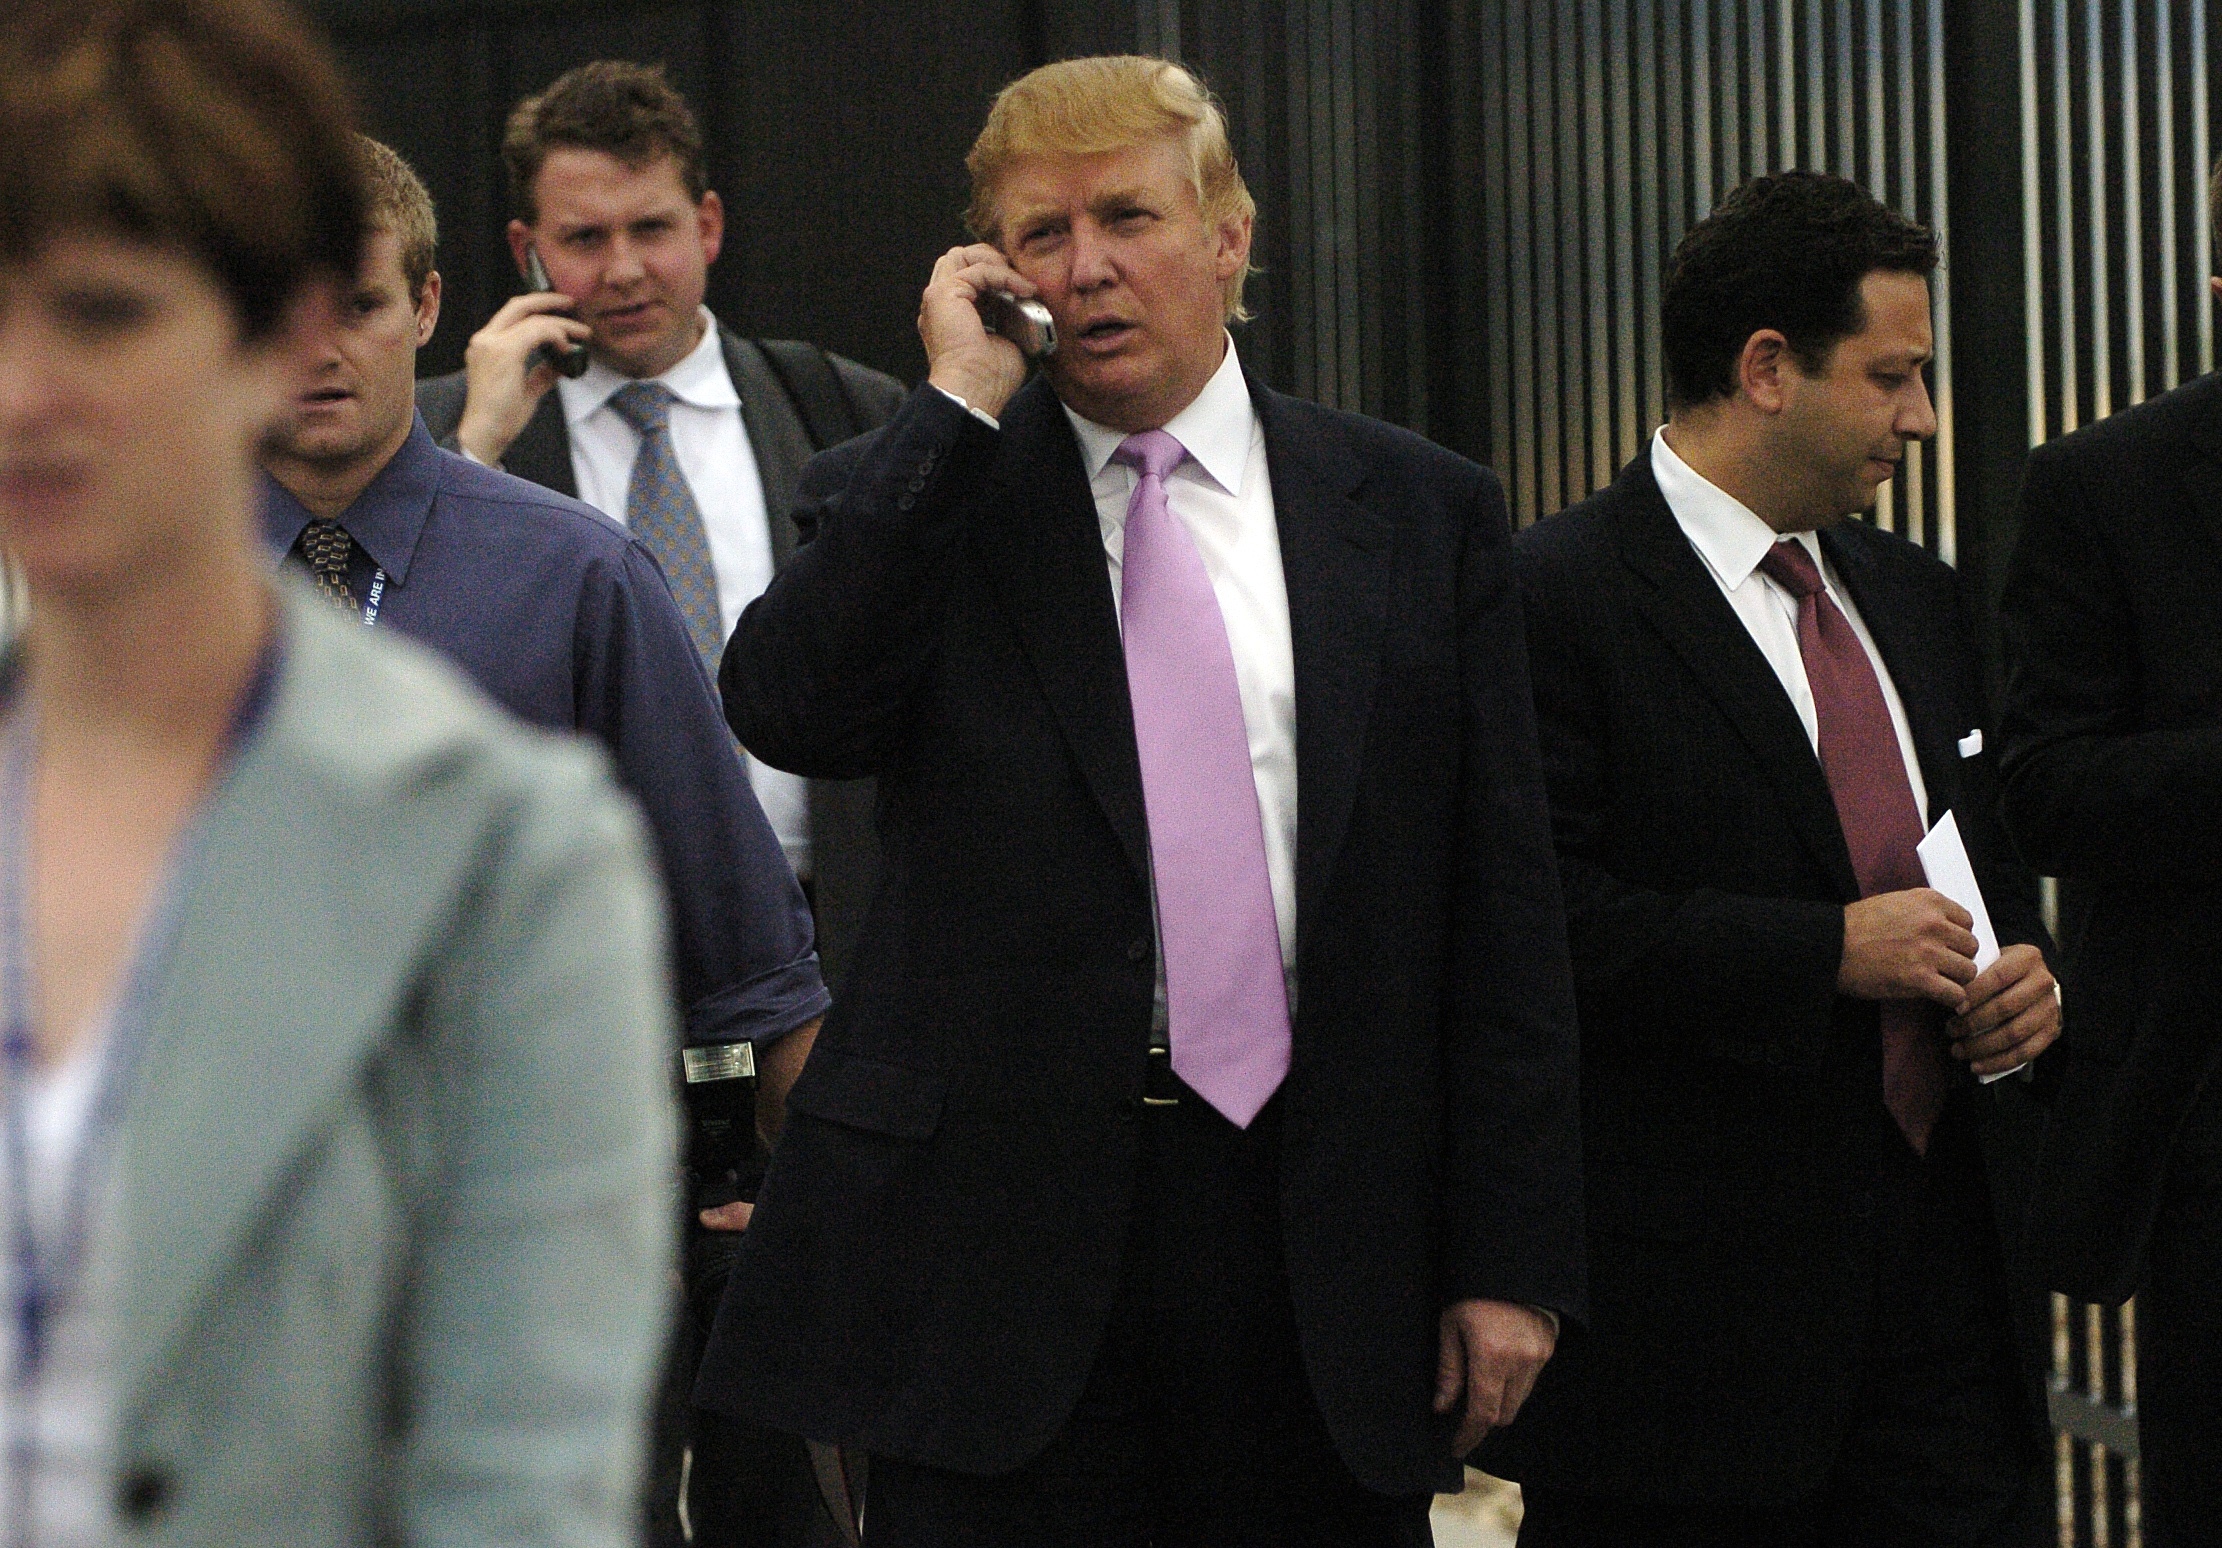 PHOTO: Donald Trump exits the Budweiser Events Center after talking at the Bixpo 2005 convention in Loveland, Colo., Sept. 14, 2005. Felix Sater appears in the red tie on Trump's left.  